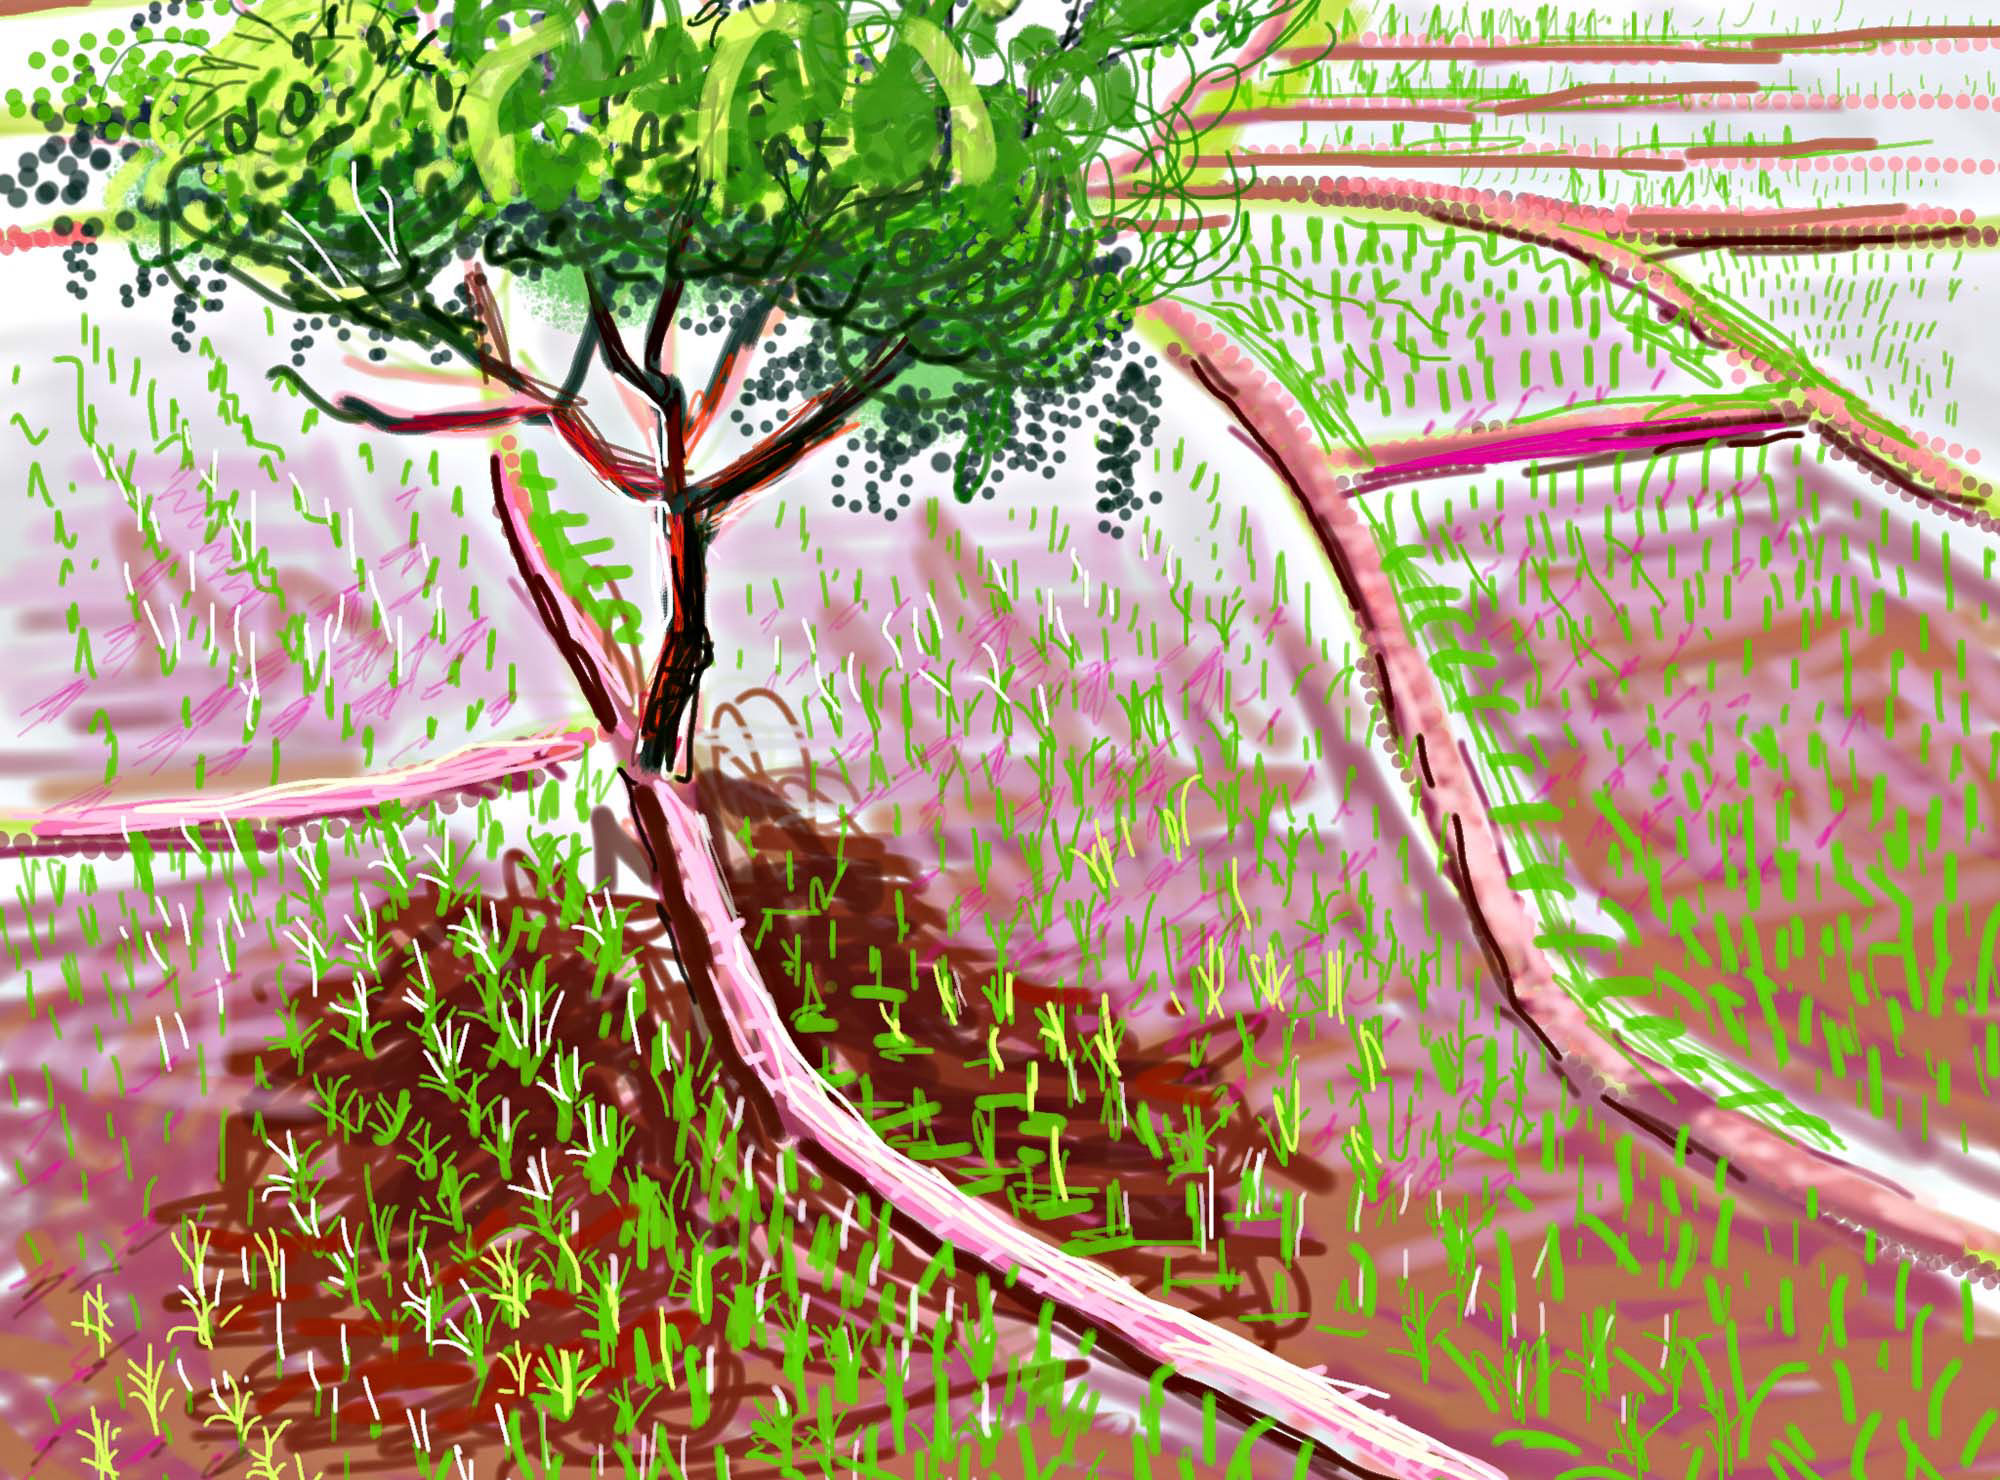 UK Research and Innovation - International Year of Plant Health 2020,  iPad drawings, Andy Maitland, iPad artist